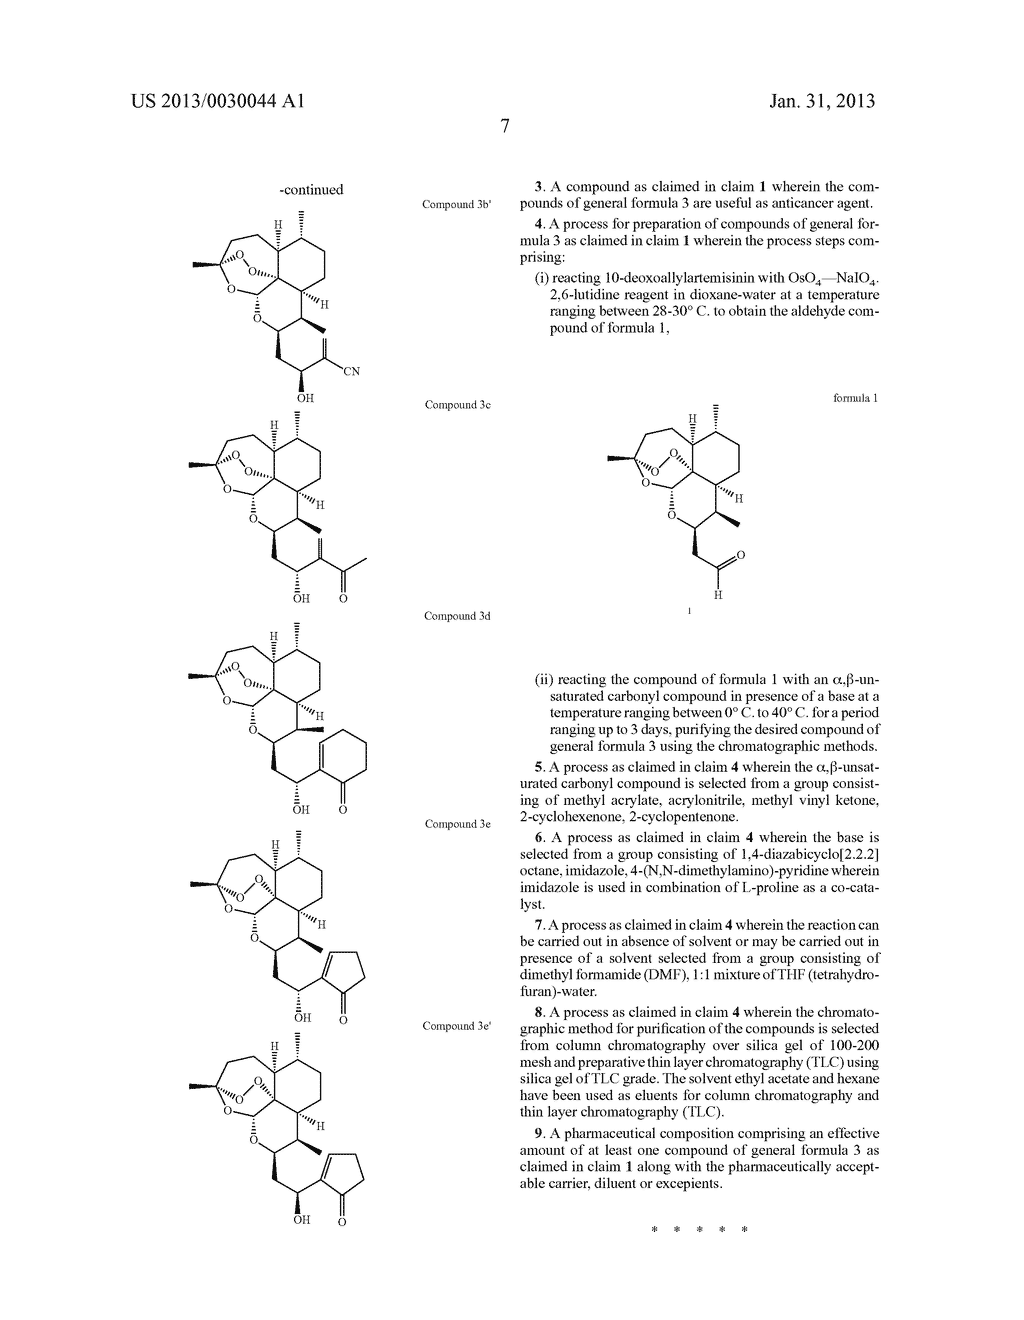 NEW SERIES OF ARTEMISININ DERIVATIVES AND PROCESS FOR PREPARATION THEREOF - diagram, schematic, and image 10